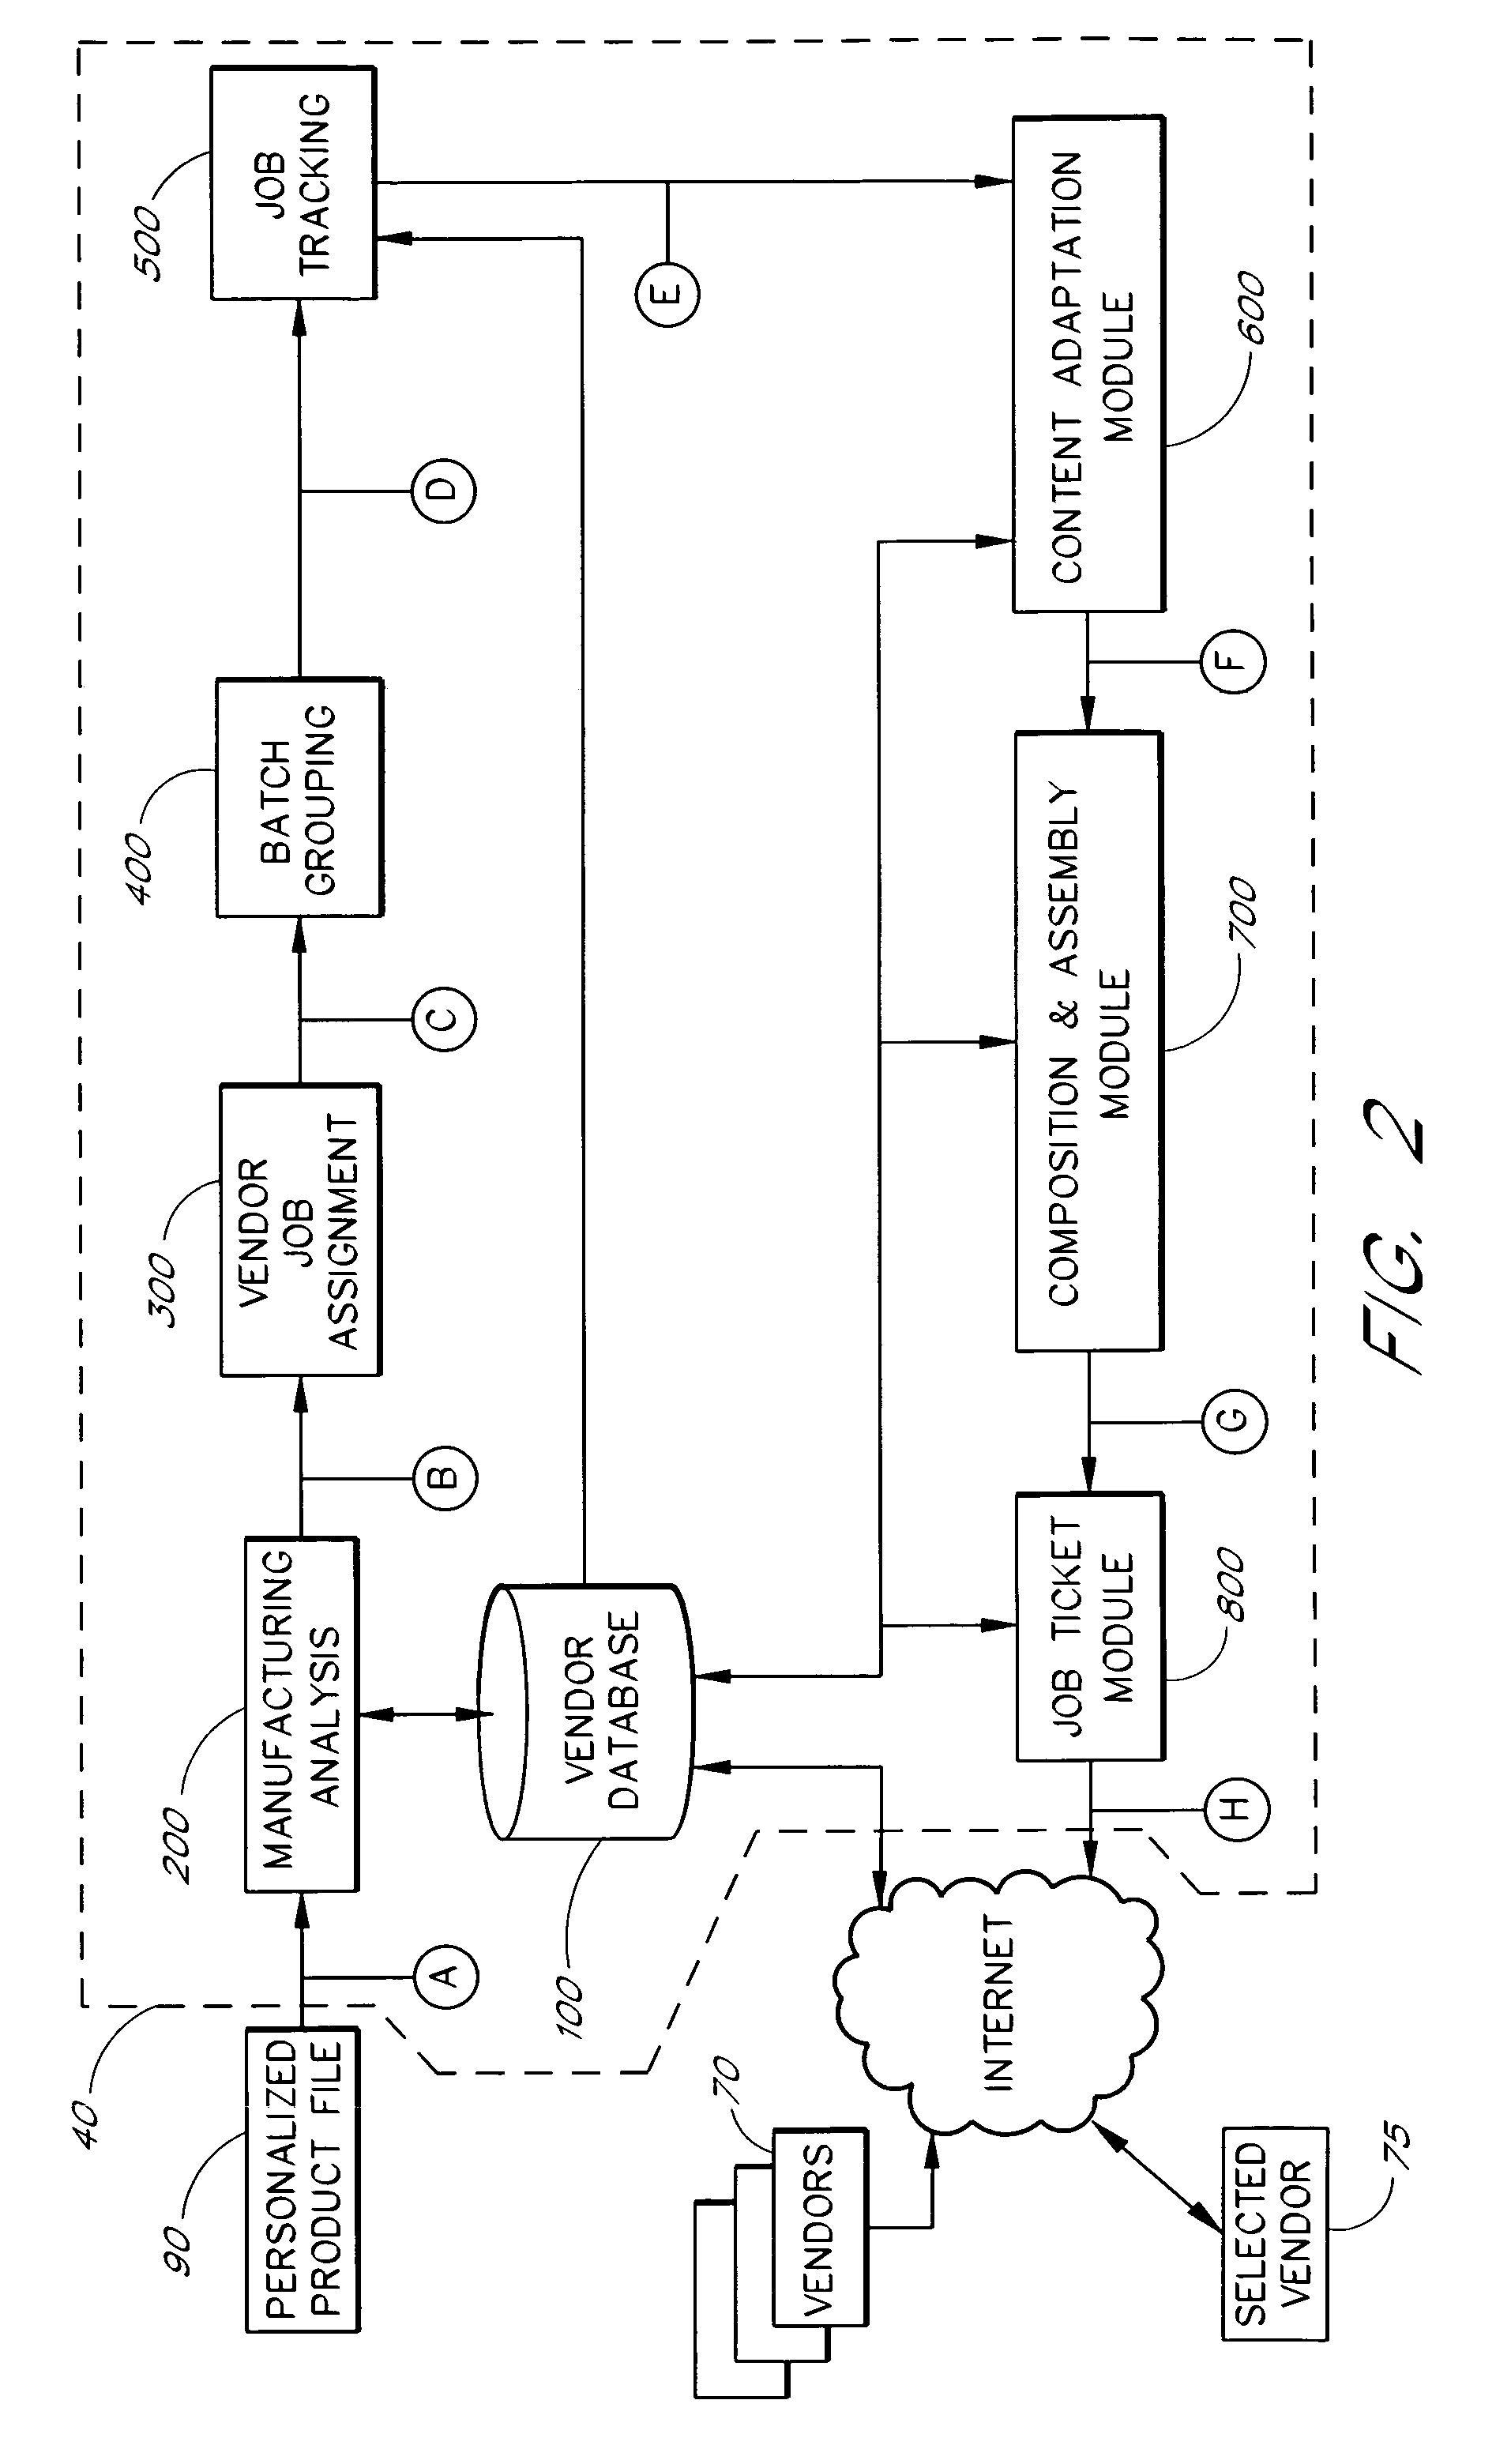 Personalization format converter system and method